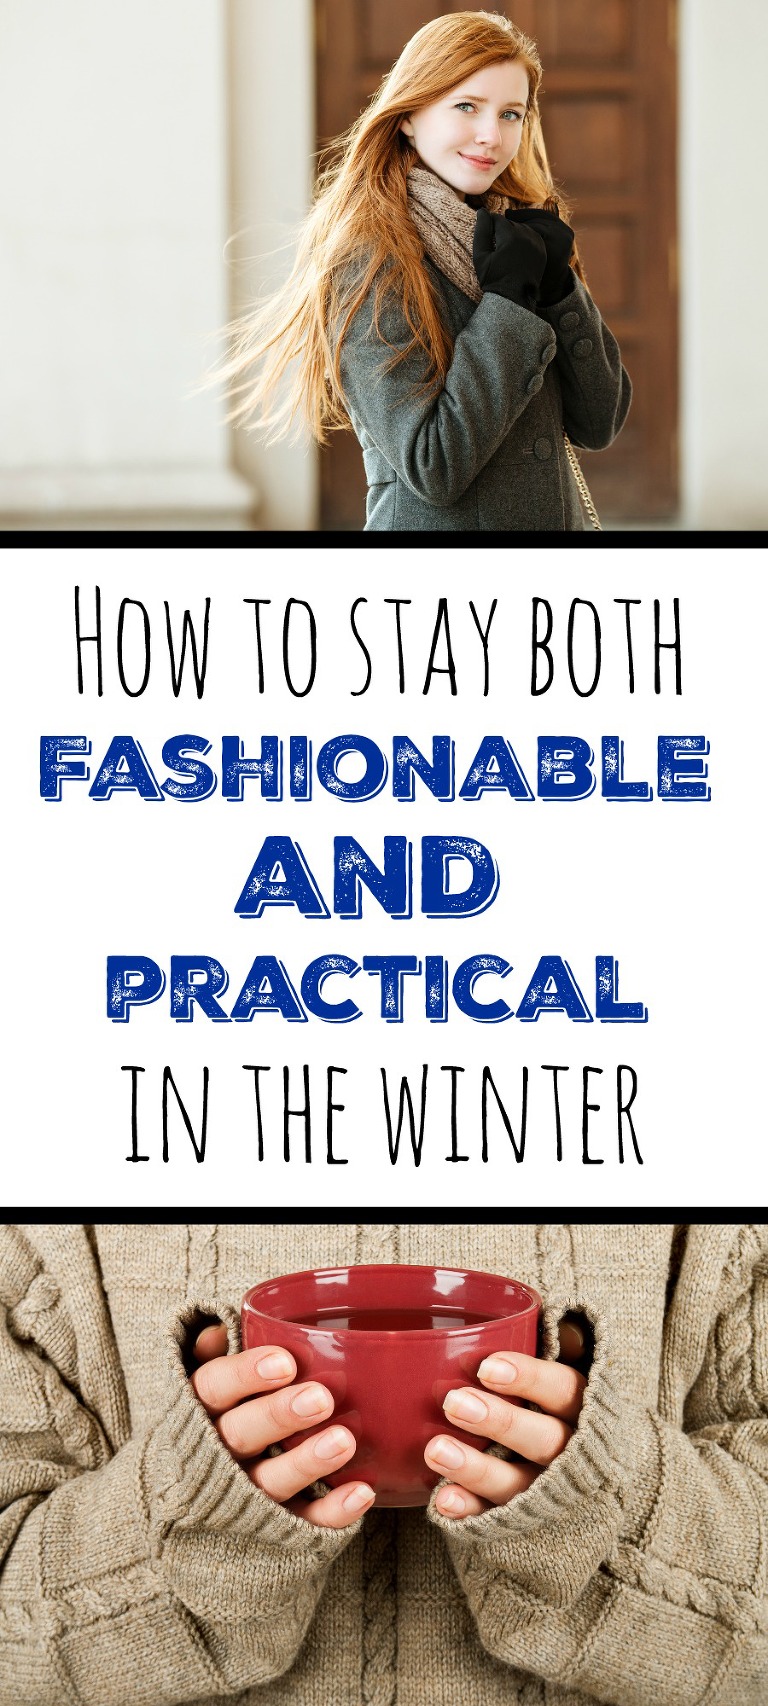 How to stay both fashionable and practical in the winter